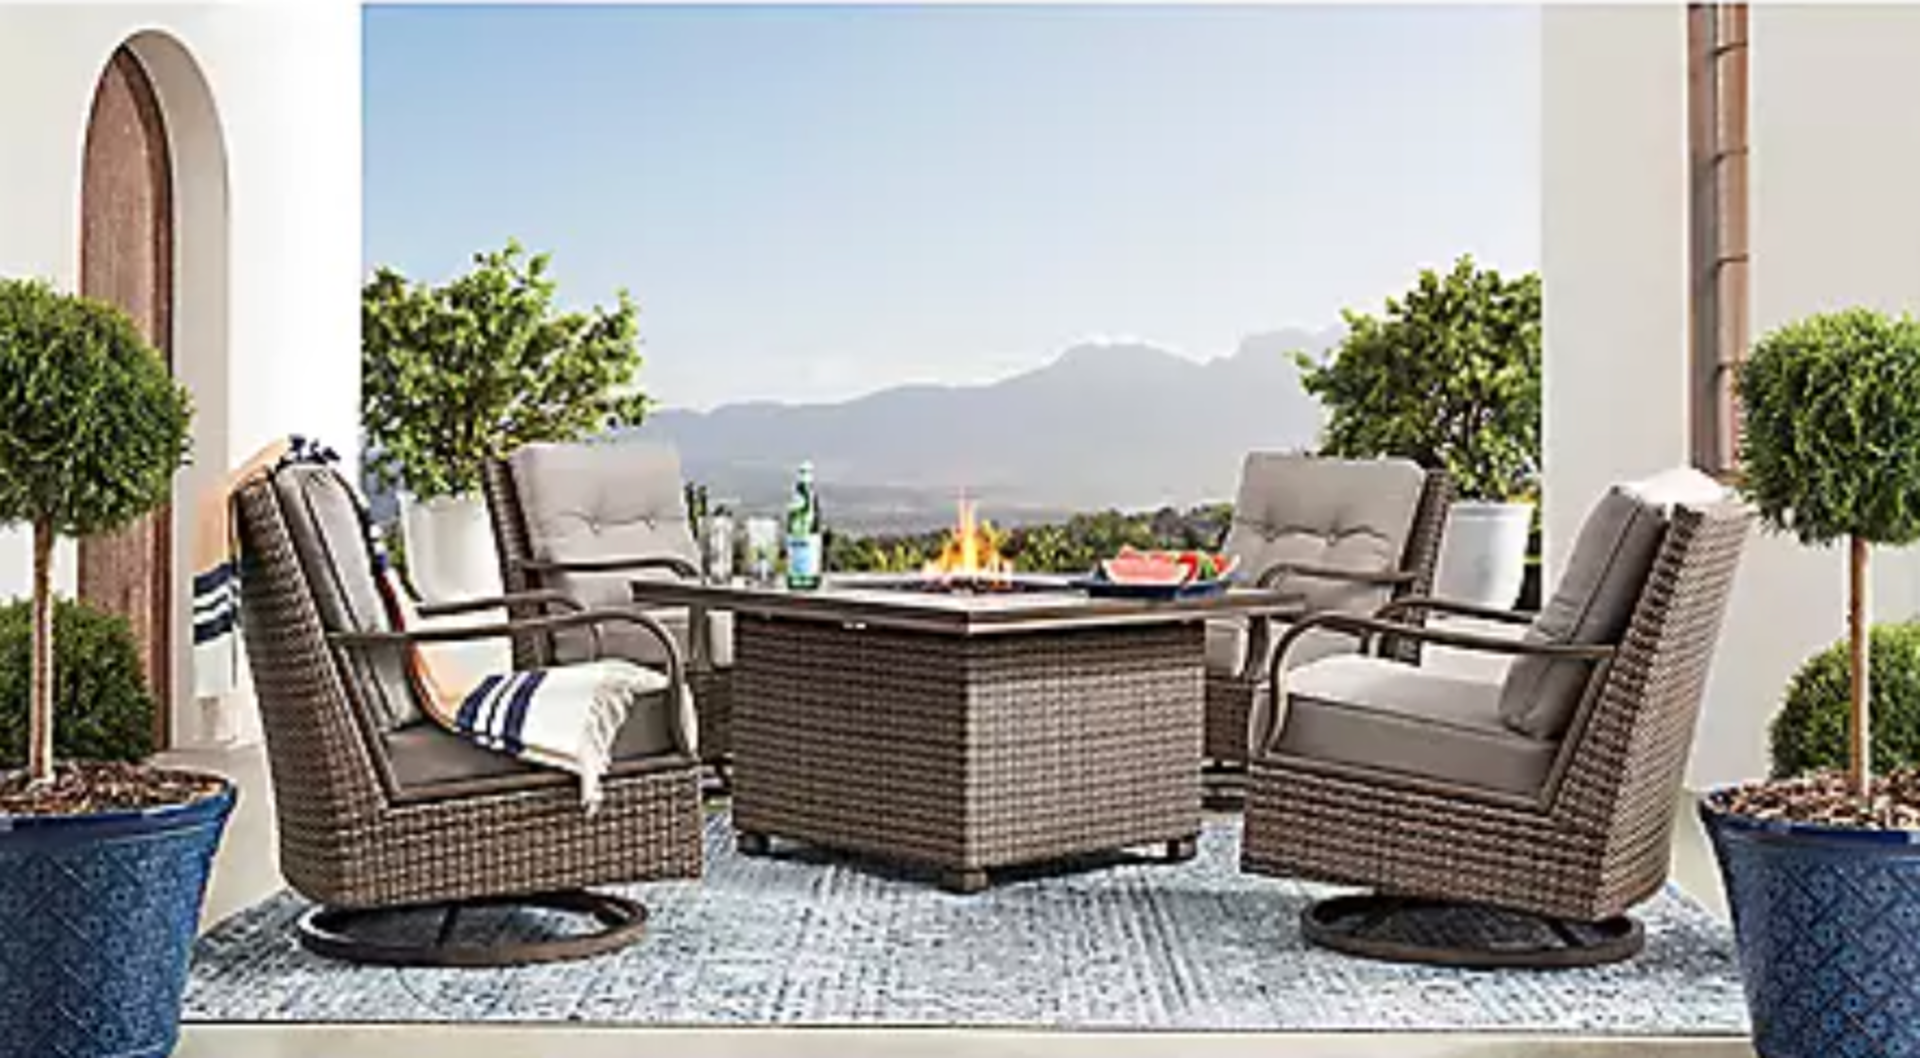 Safe, Outdoor Seating - Image 10 of 13